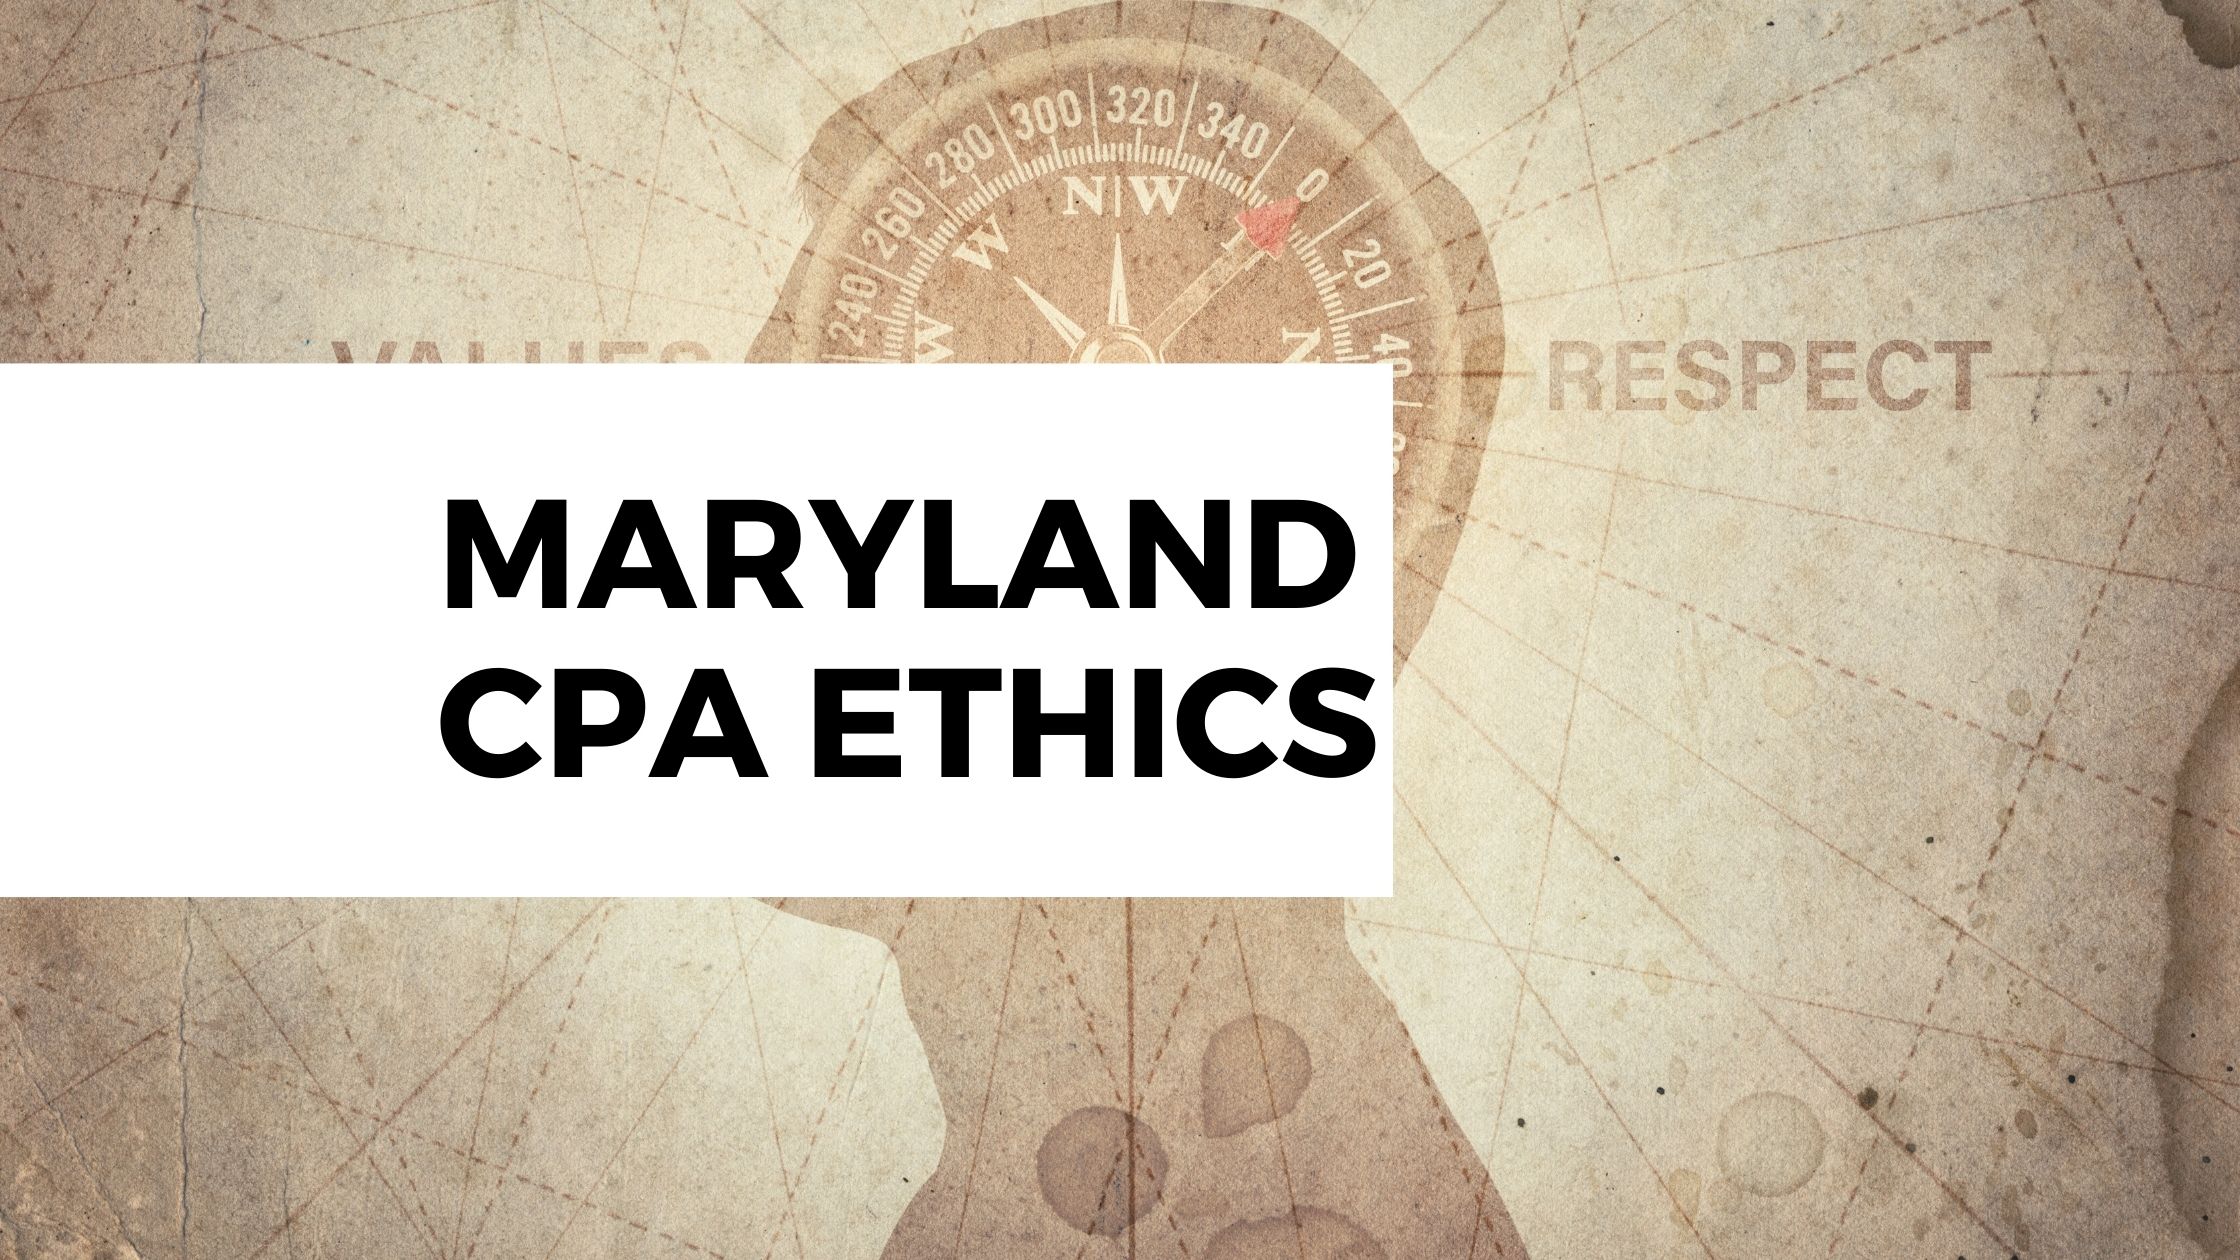 Maryland CPA Ethics, Ocean City, MD